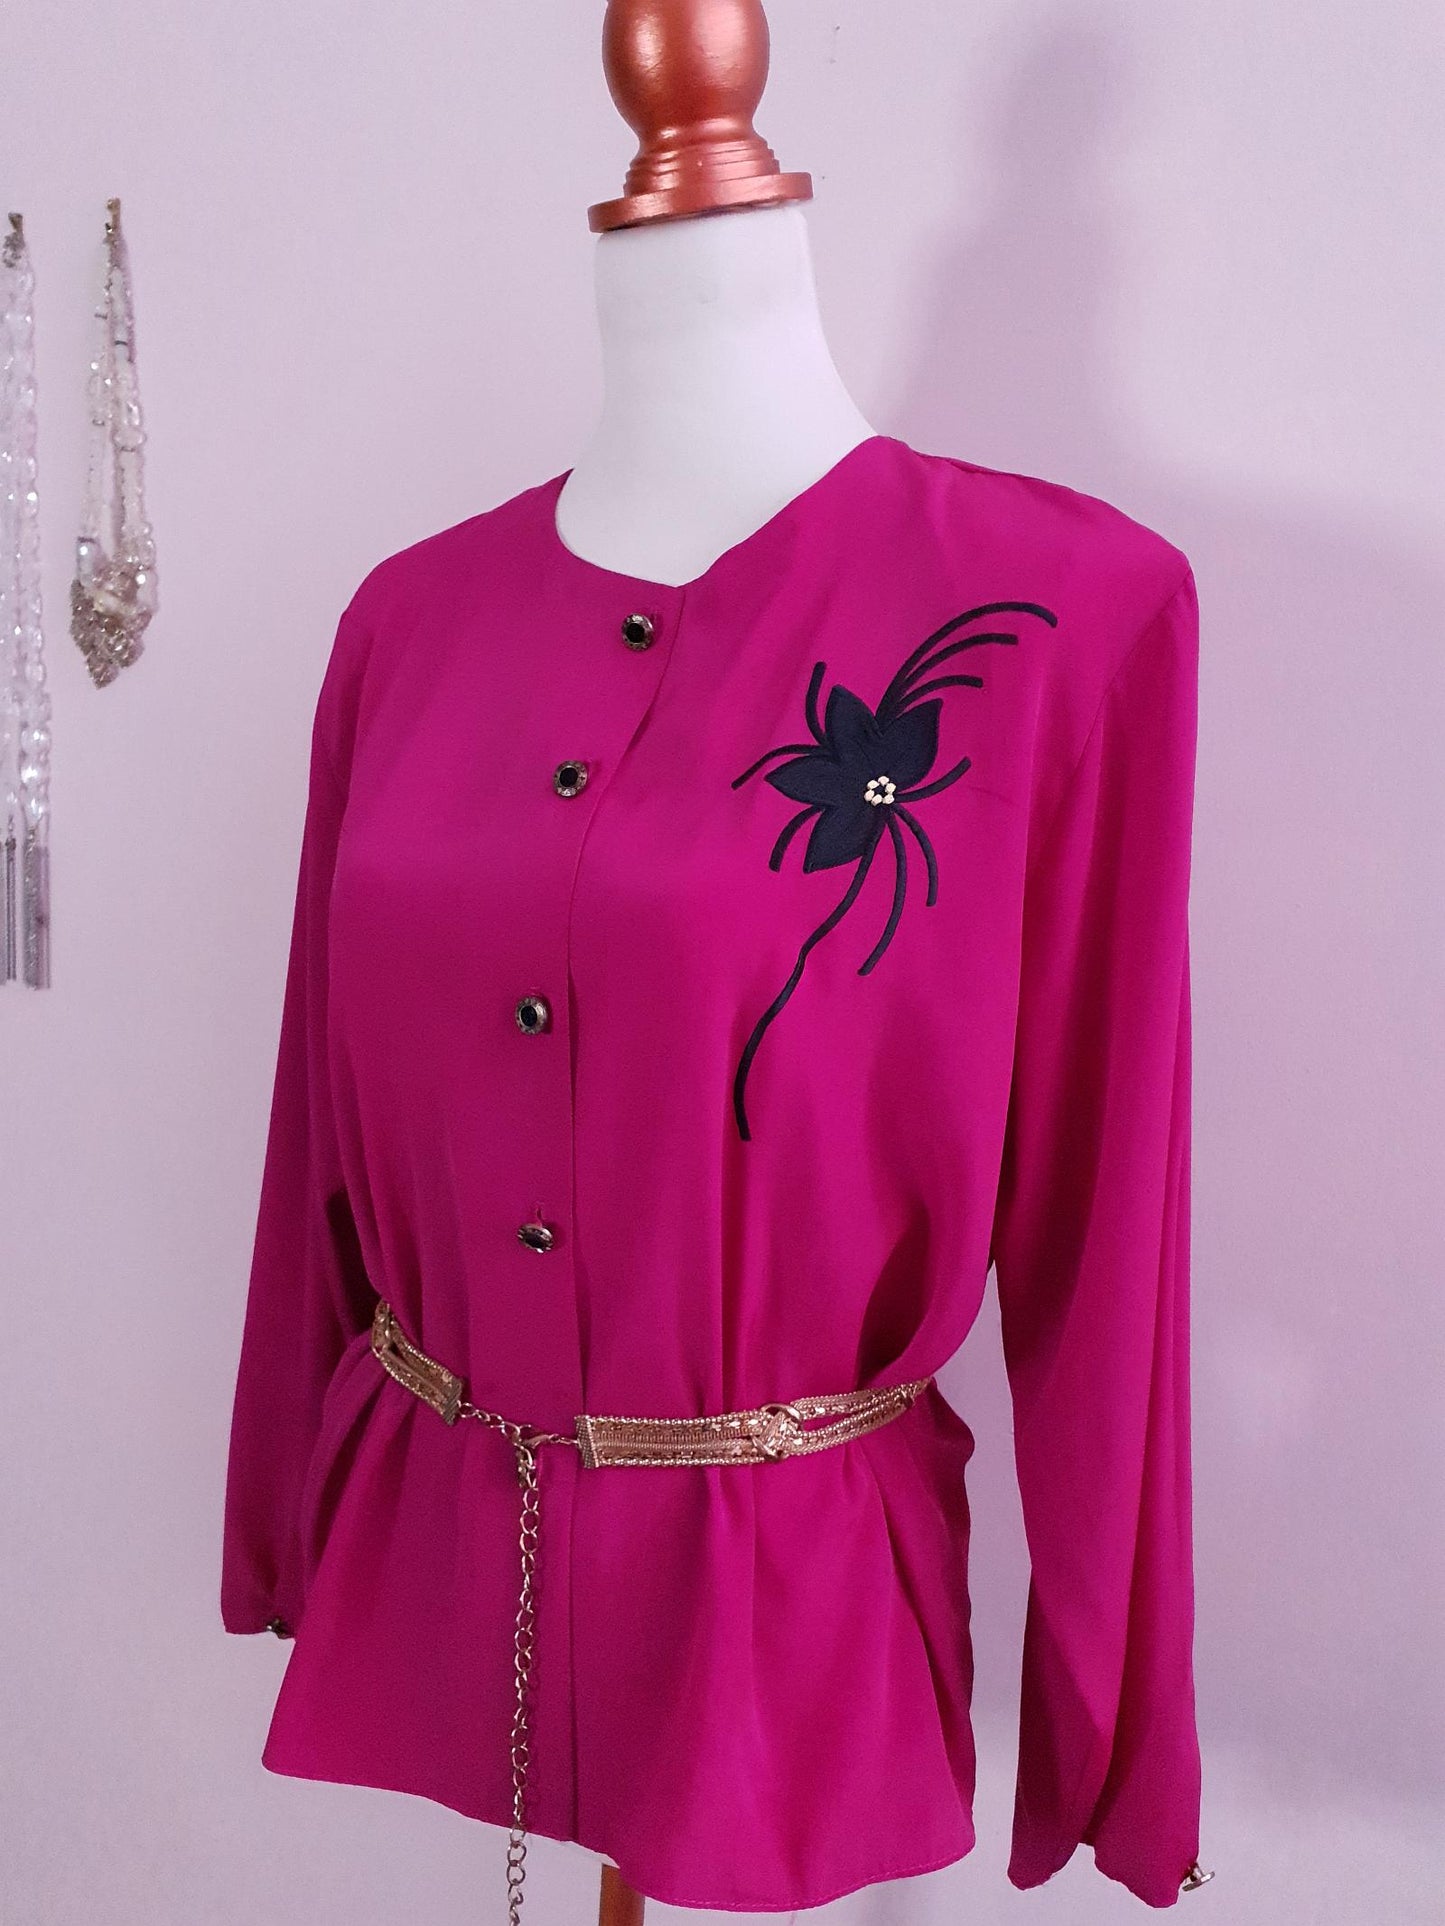 Chic Pre-Loved 1980s Cerise Pink Oversize Blouse